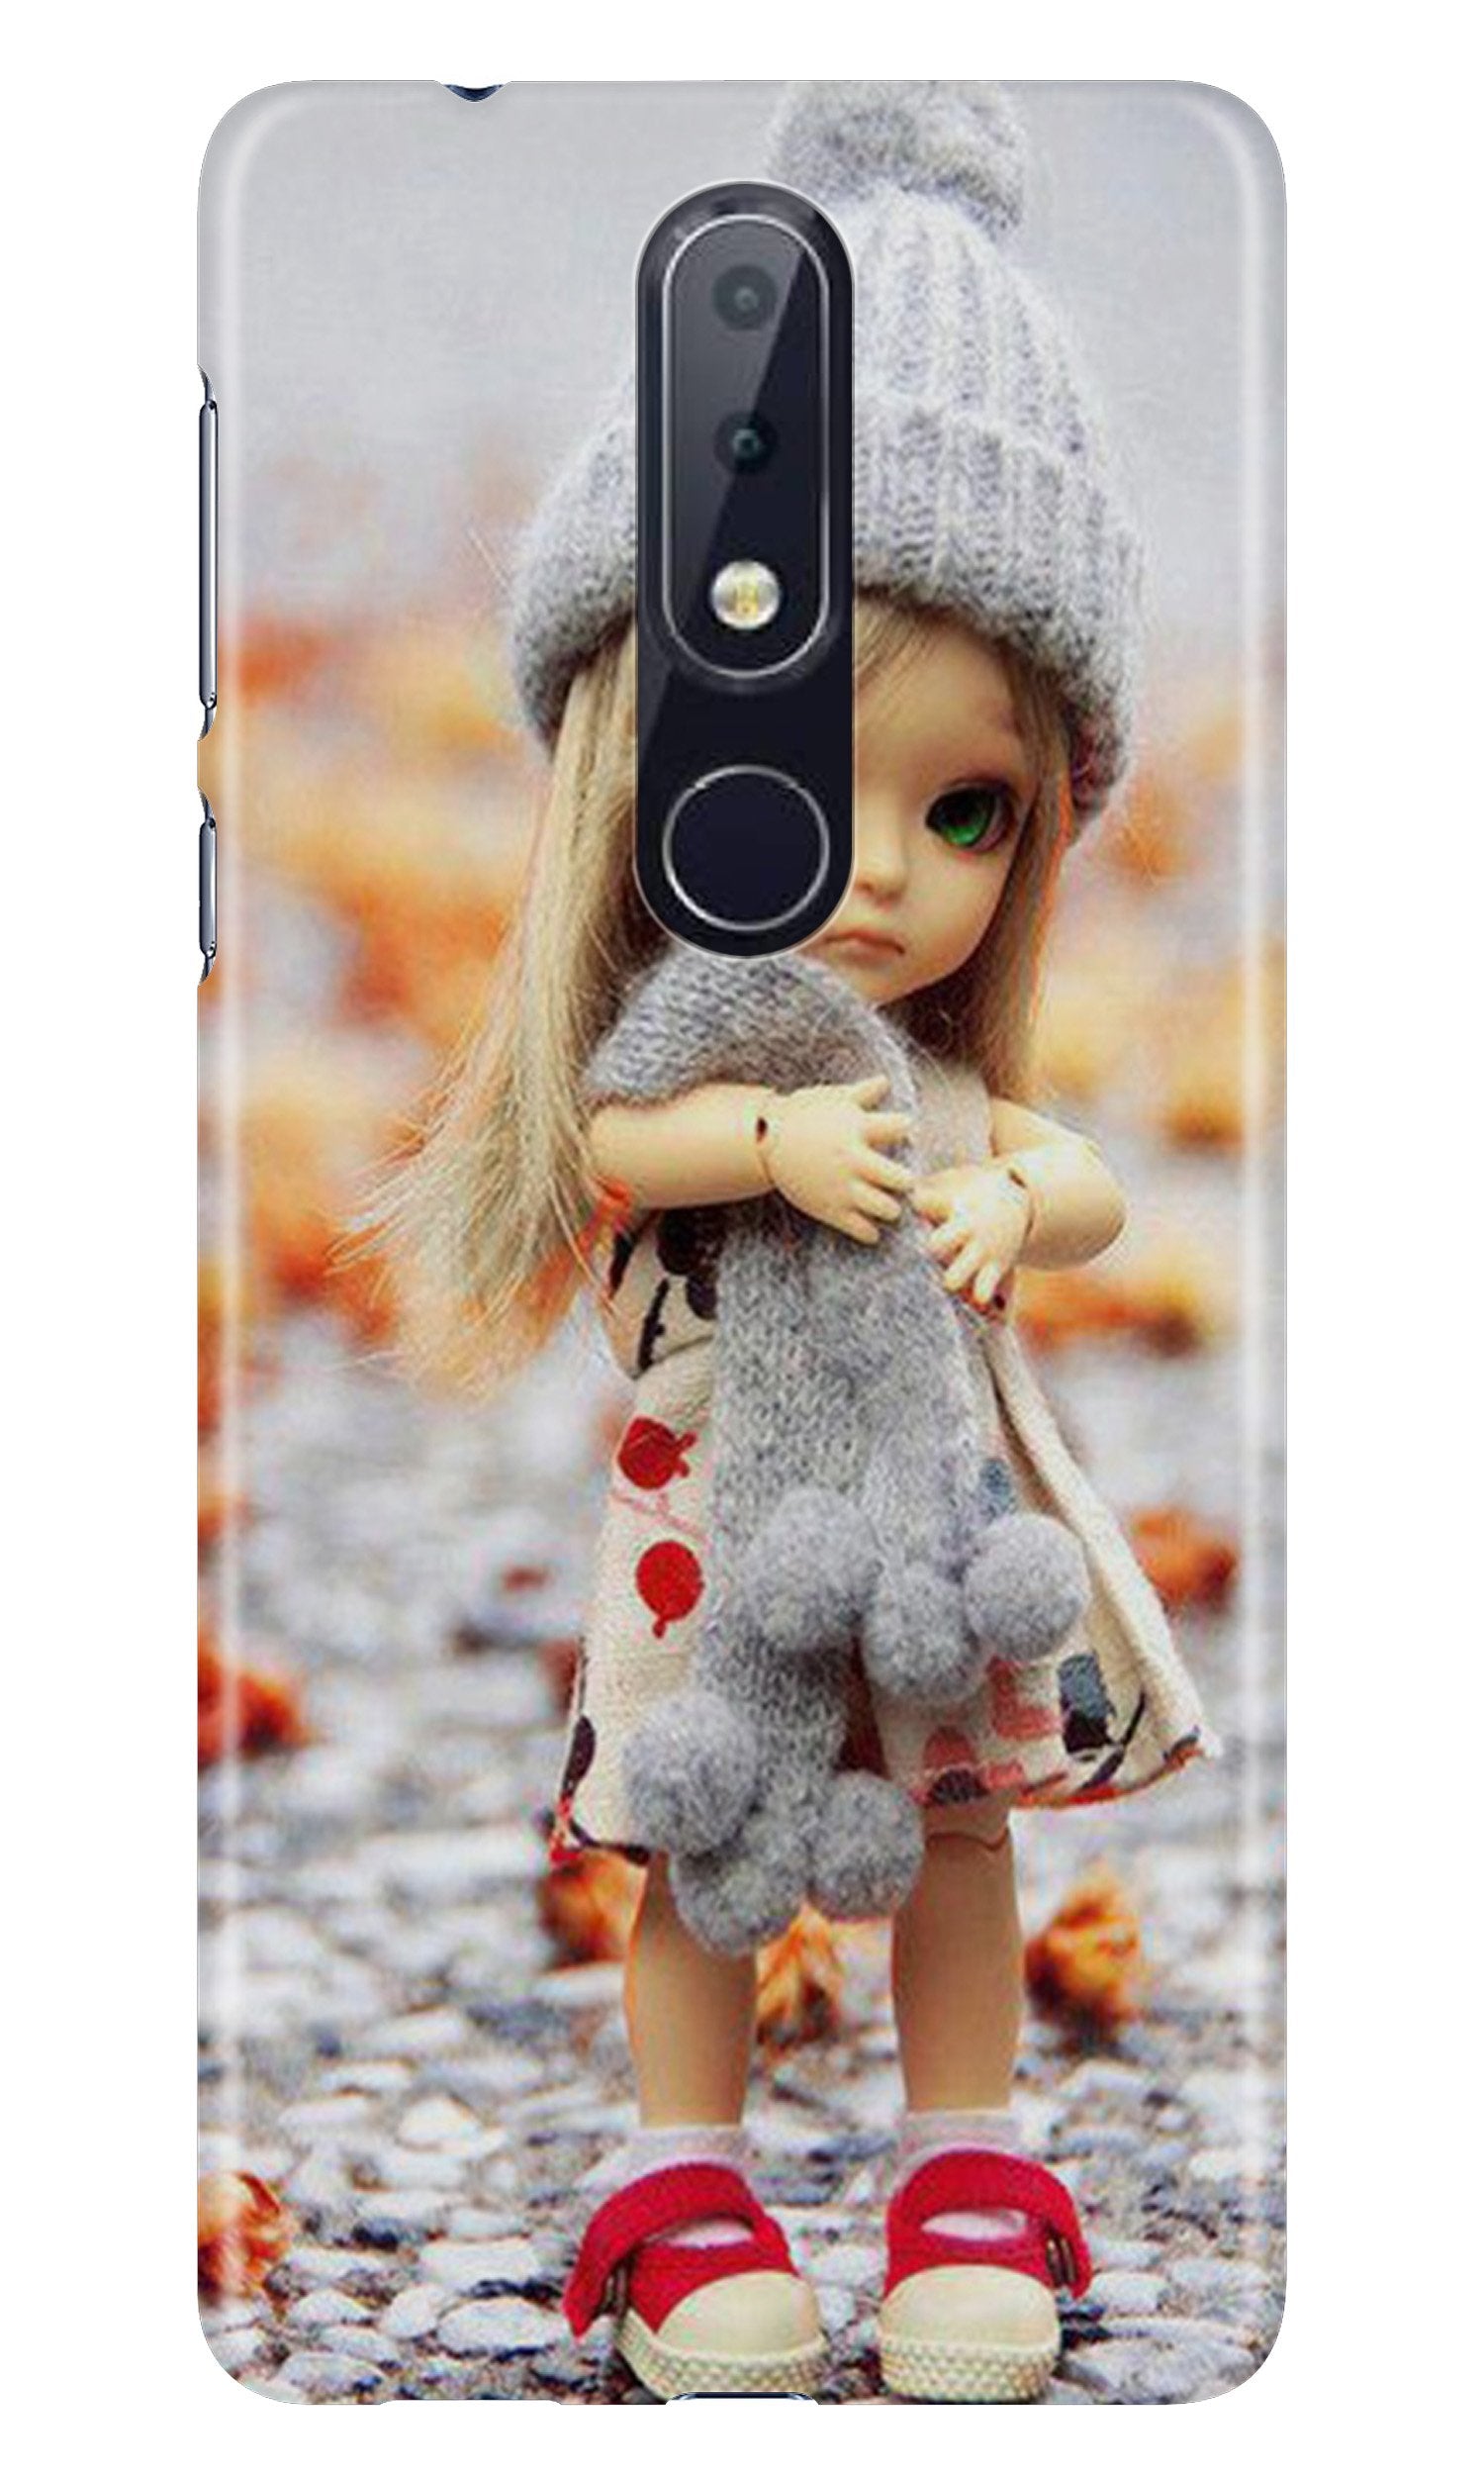 Cute Doll Case for Nokia 6.1 Plus